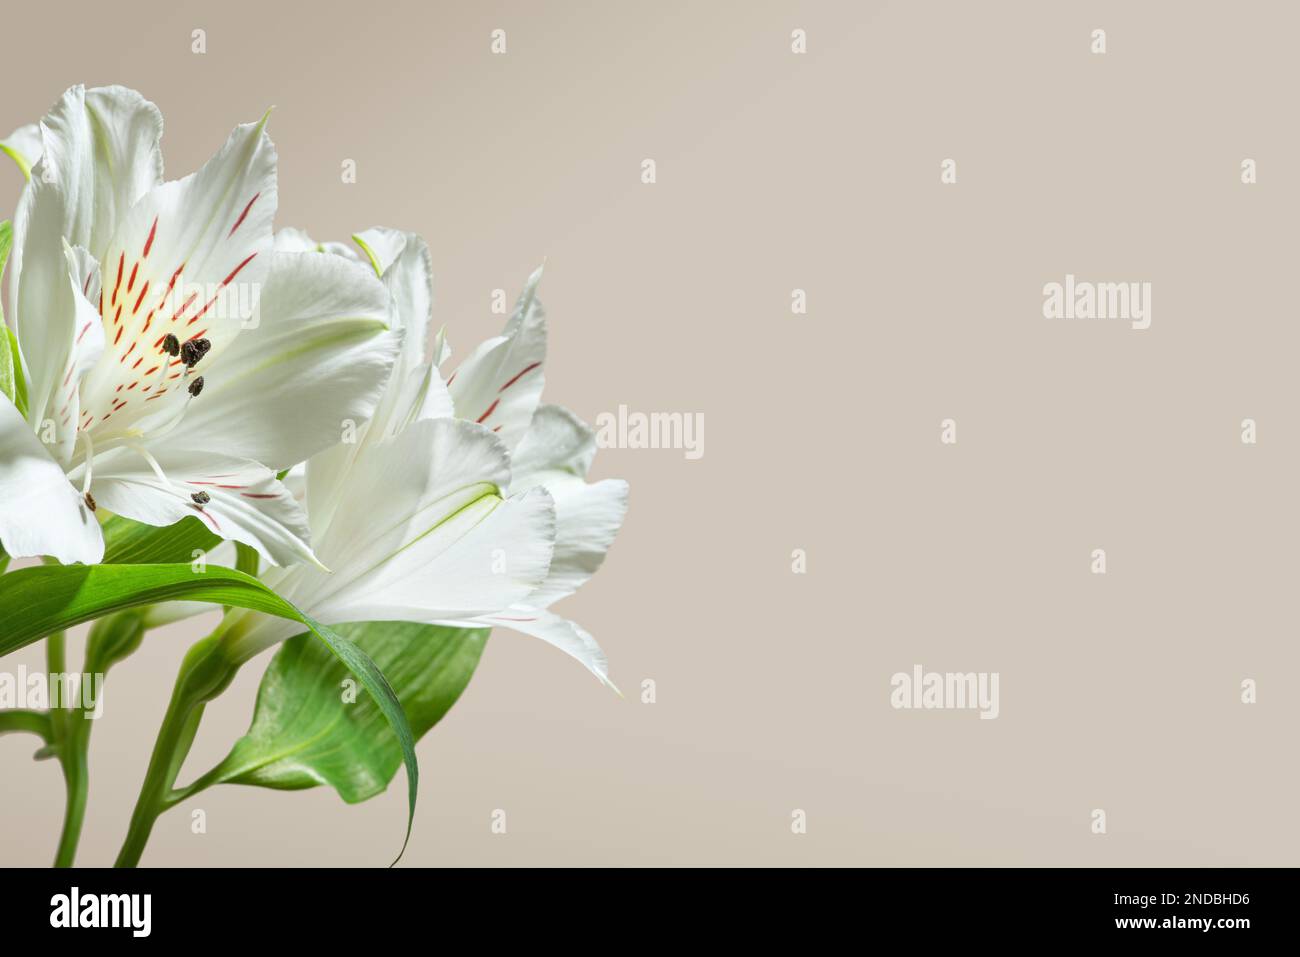 colorful alstroemeria flowers on a beige background Stock Photo